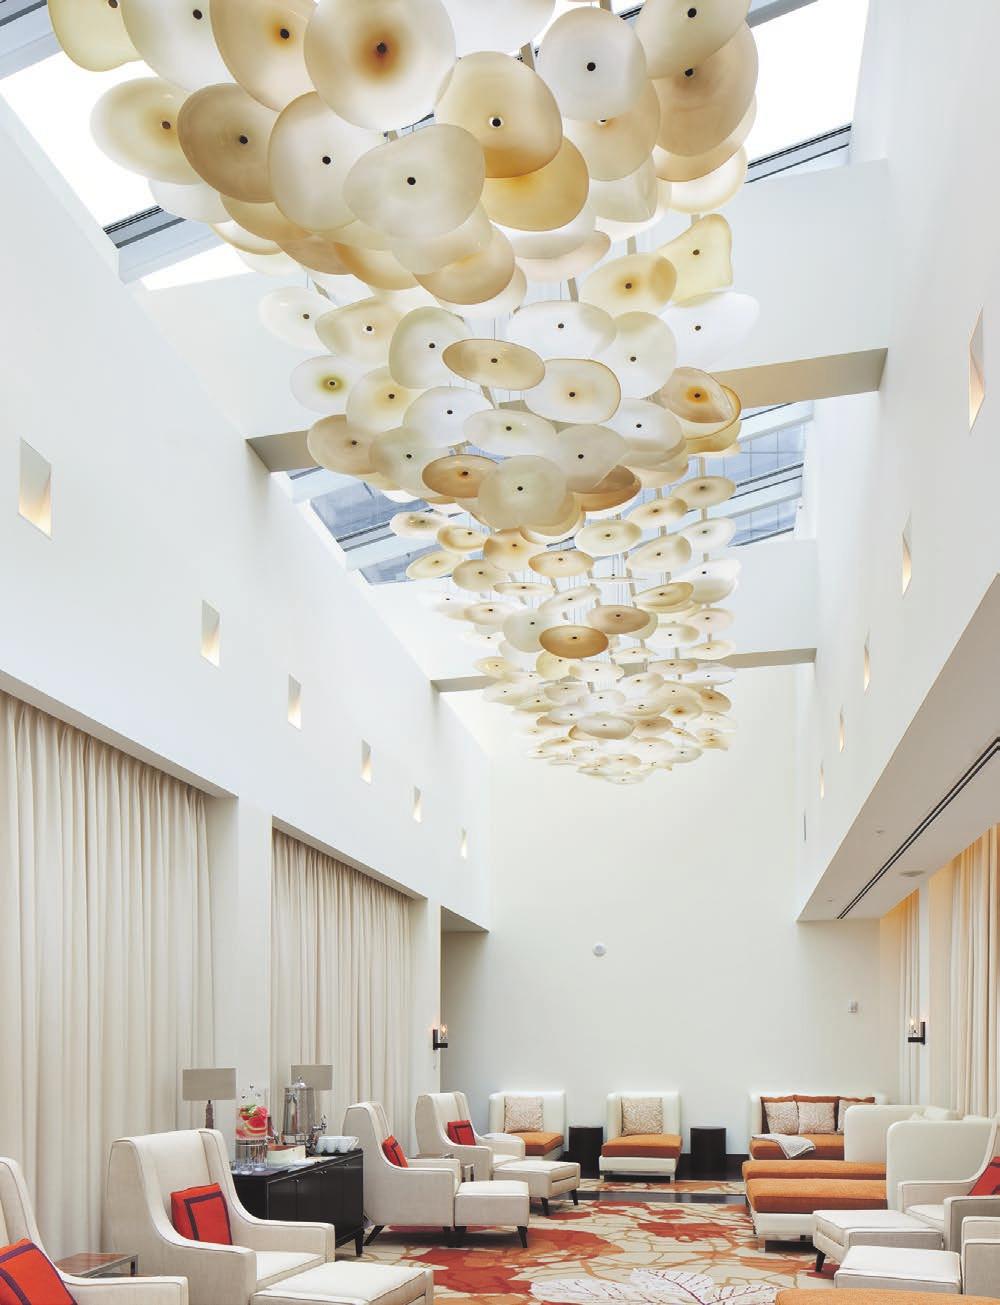 Enso Chandelier Located at the Ritz-Carlton Spa in Toronto Ontario, this glass installation consists of 259 hand blown glass discs suspended below a skylight. 2.75m X 12m.